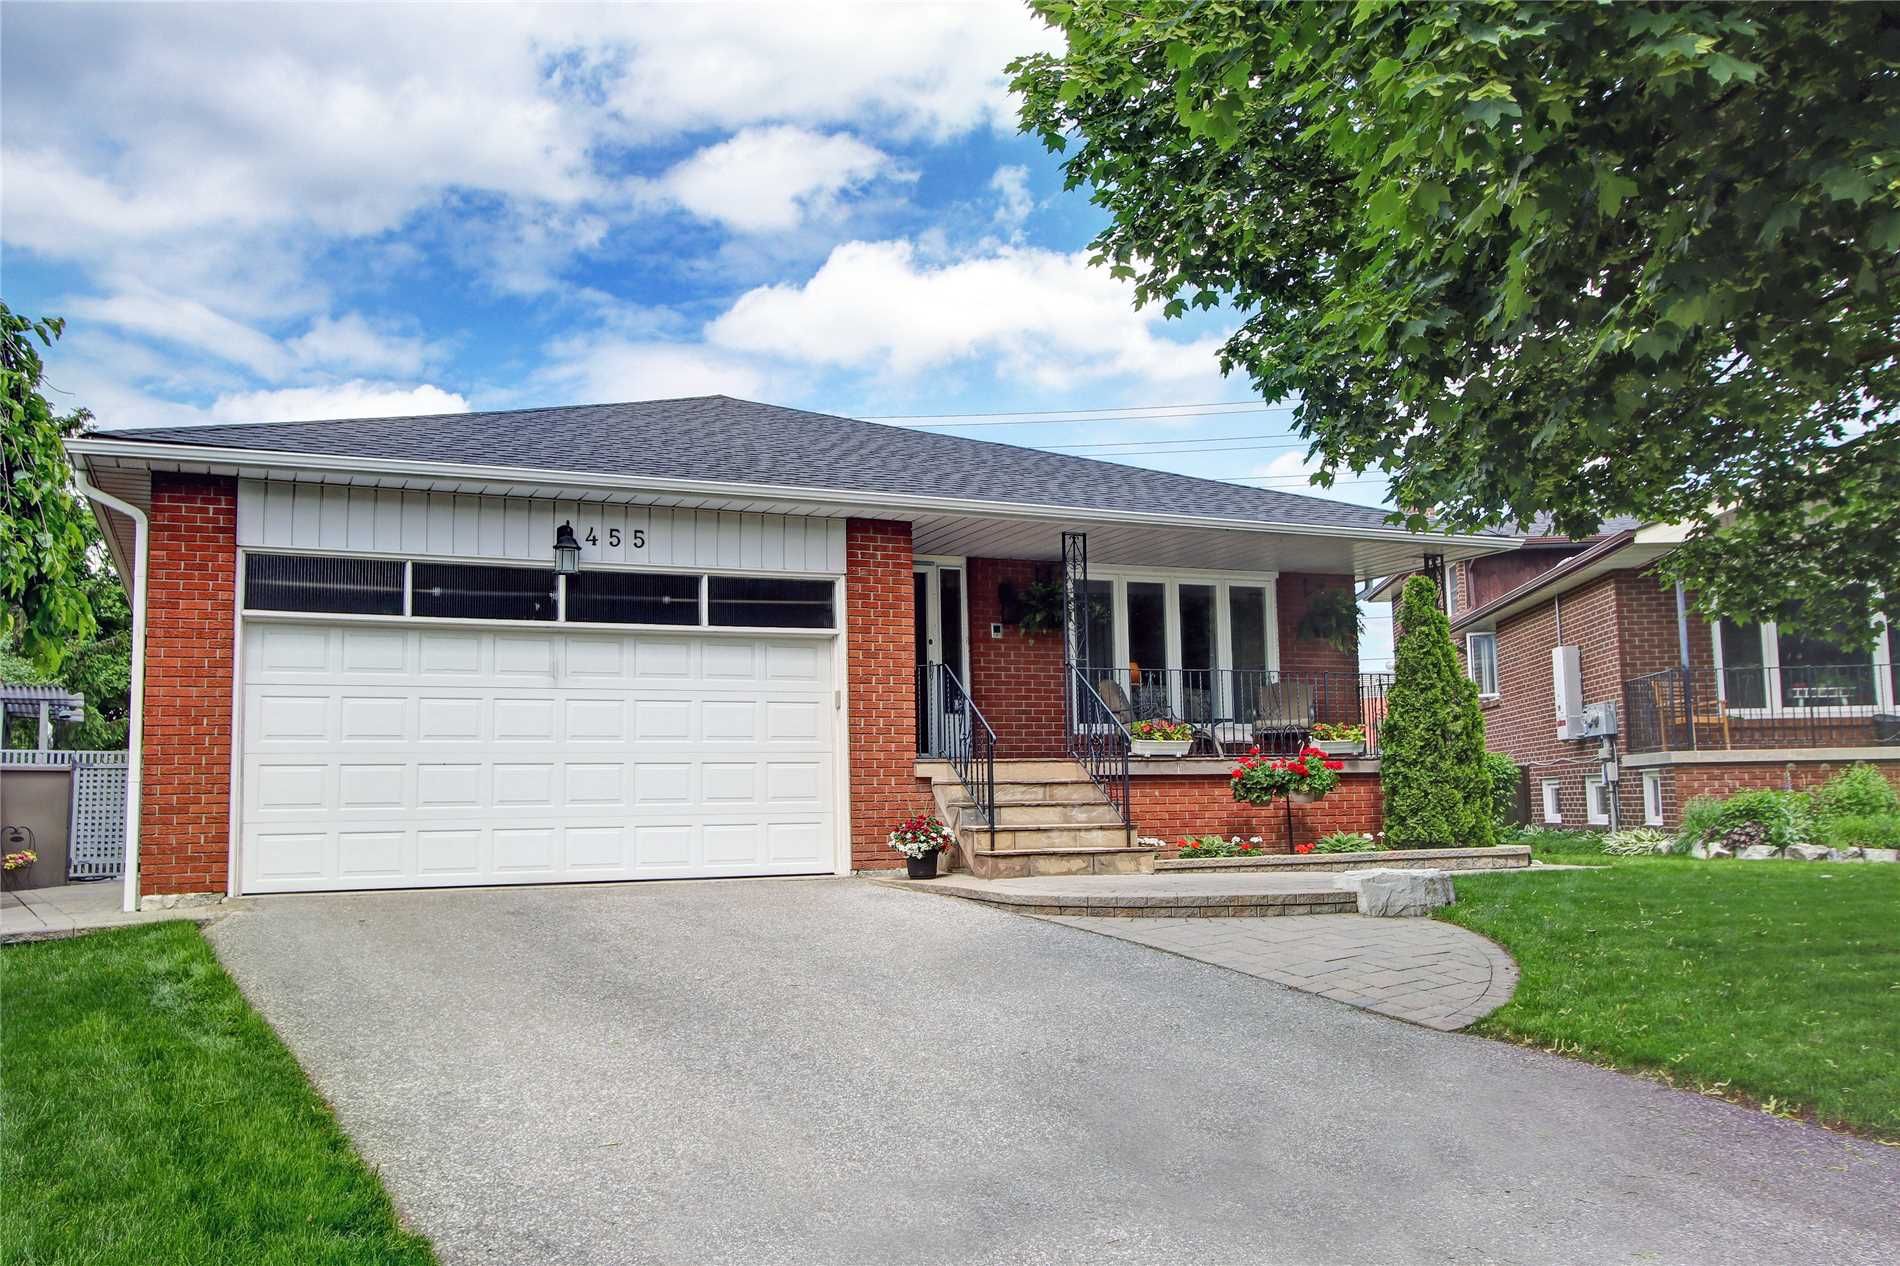 Main Photo: 455 Becker Rd in Richmond Hill: Freehold for sale : MLS®# N4487363